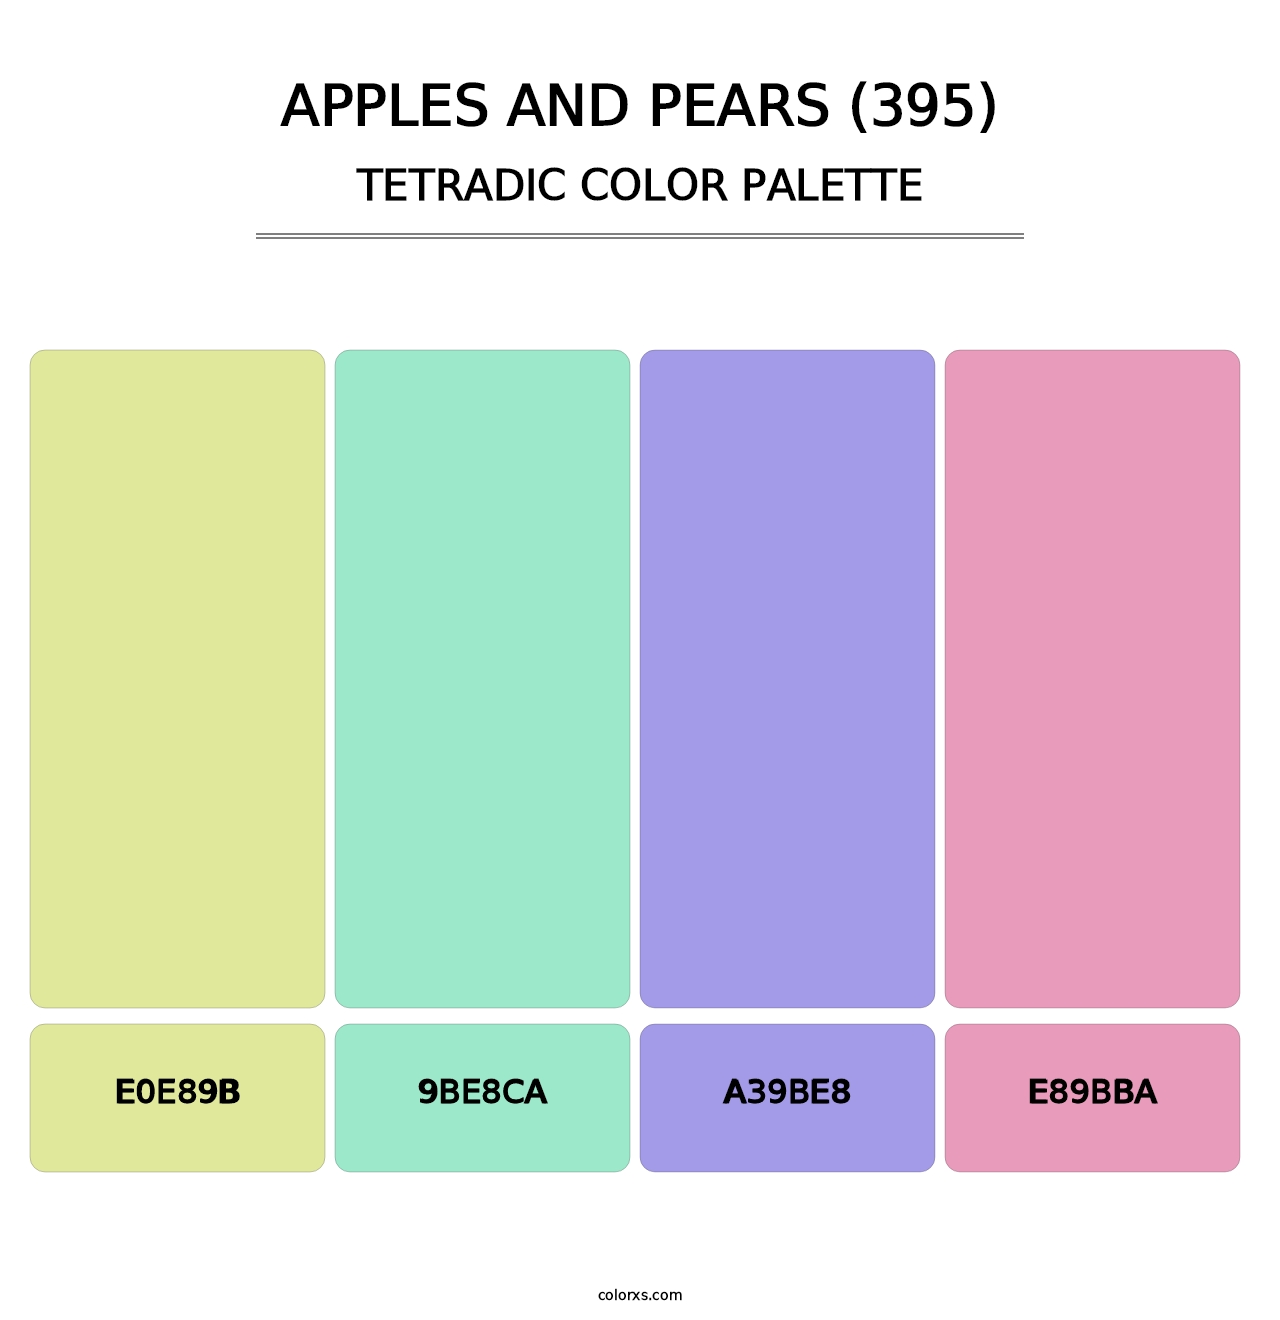 Apples and Pears (395) - Tetradic Color Palette